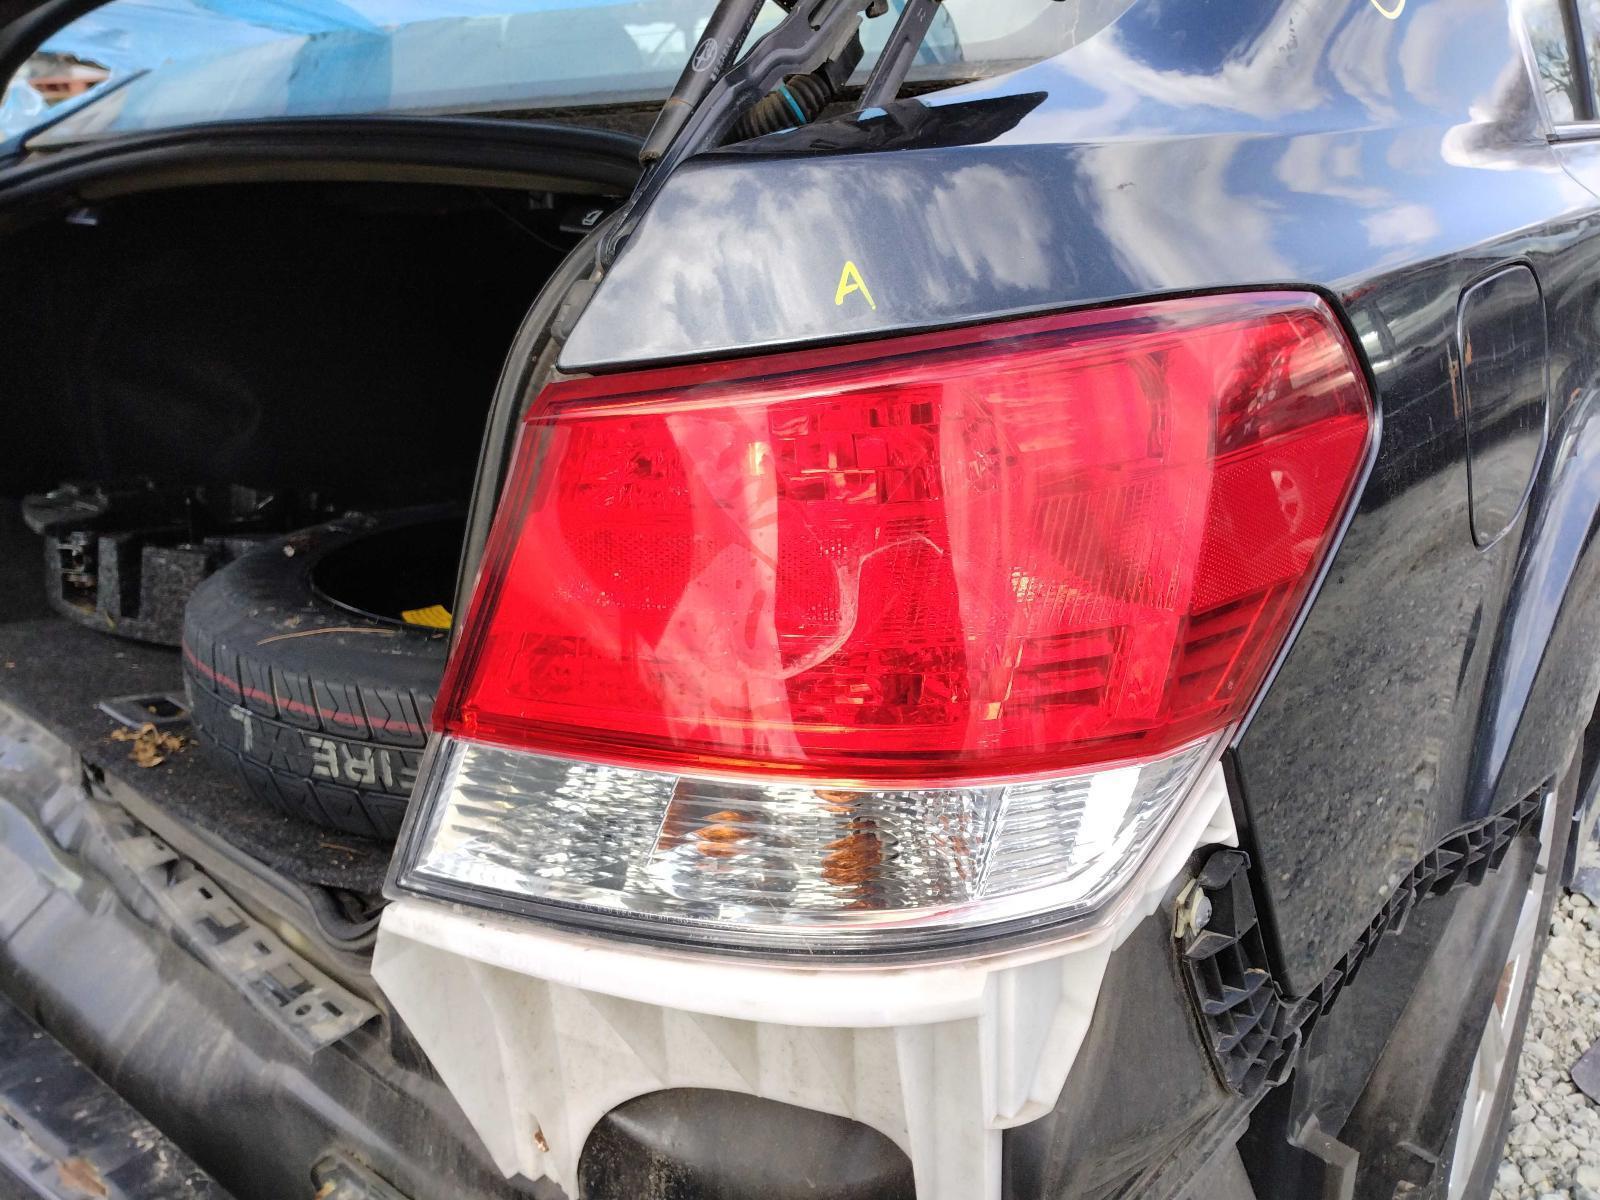 Used Right Tail Light Assembly fits: 2012 Subaru Legacy Sdn quarter panel mounte